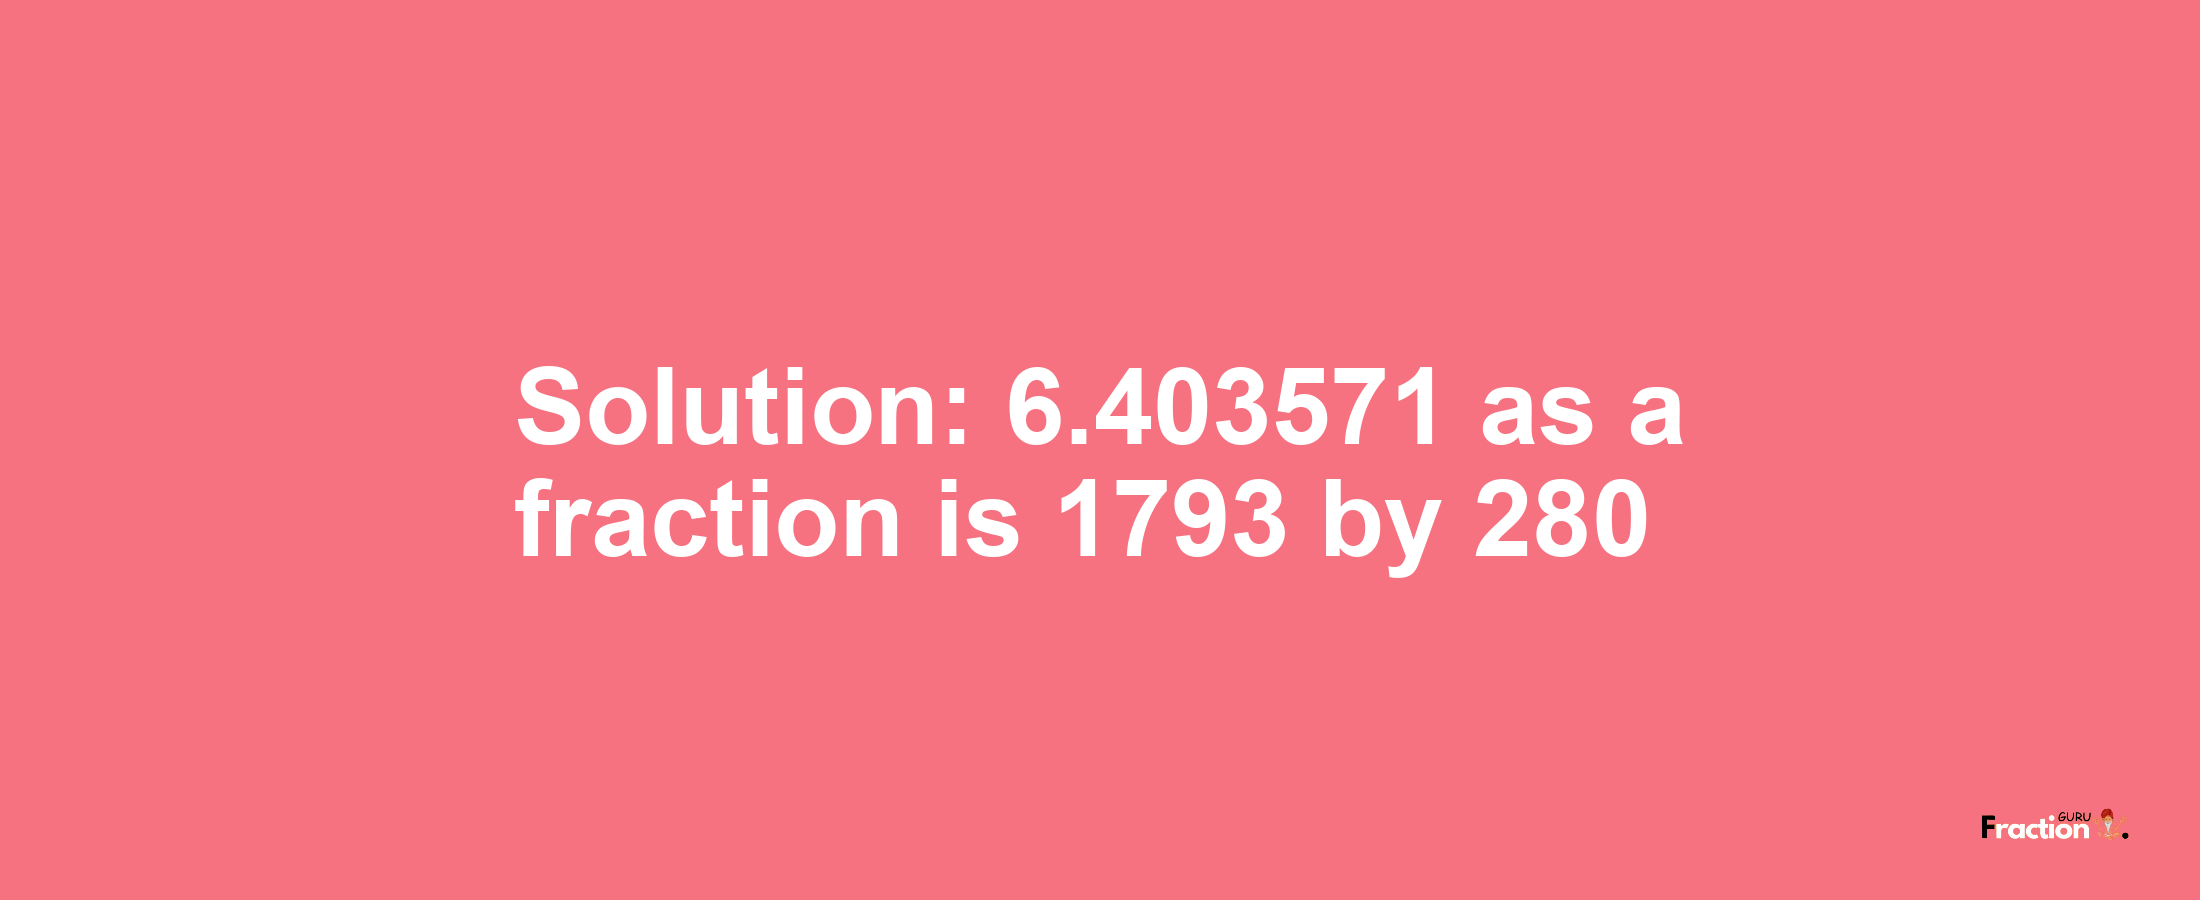 Solution:6.403571 as a fraction is 1793/280